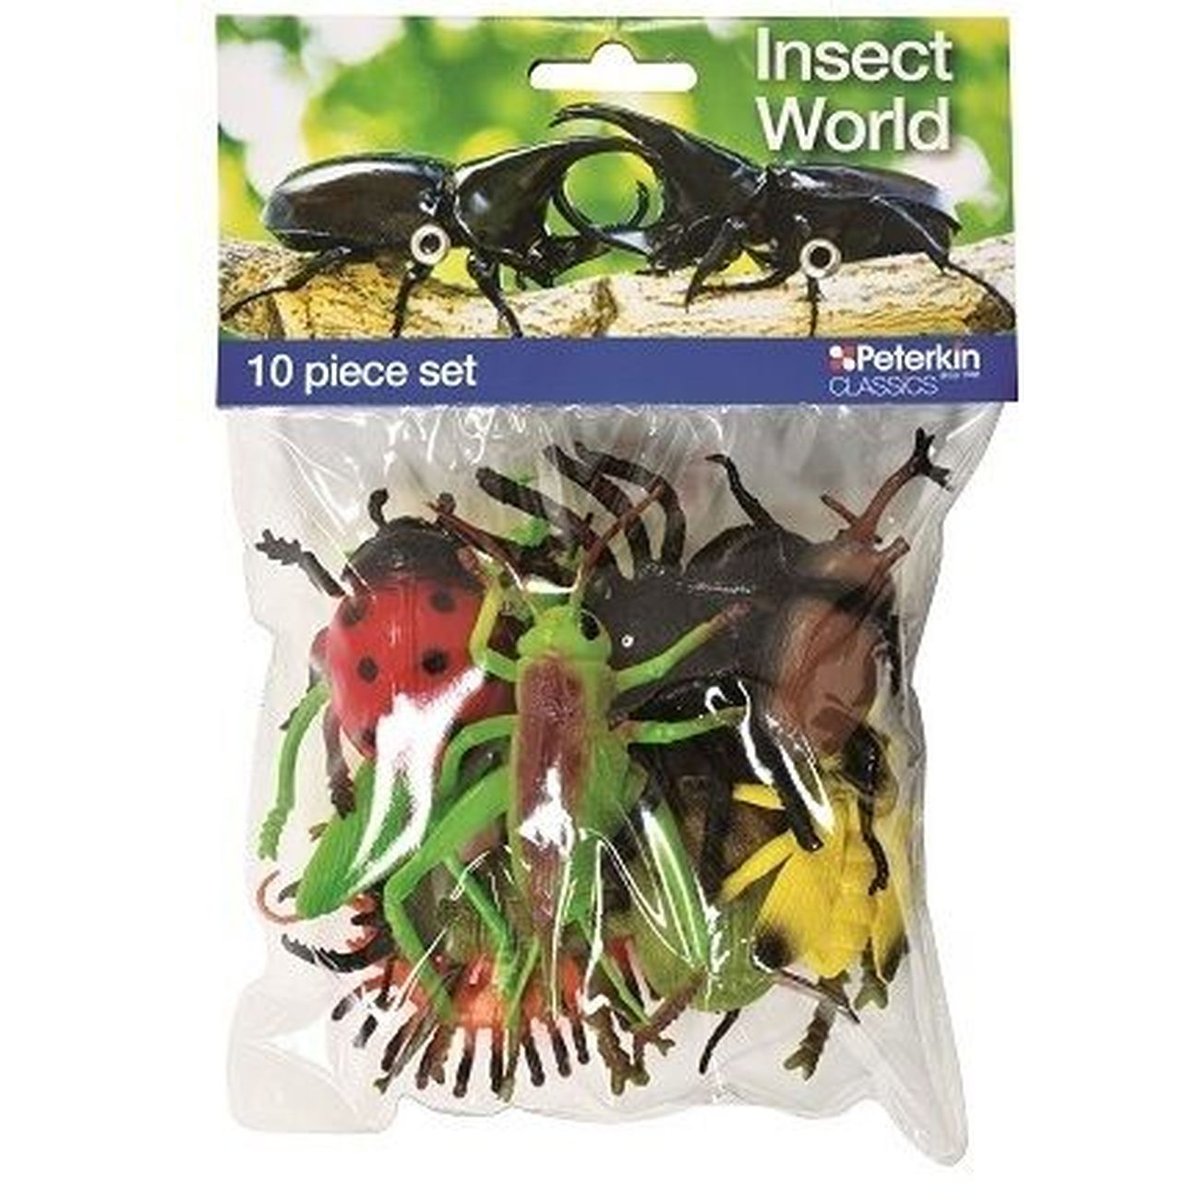 INSECT WORLD 10PC FIG